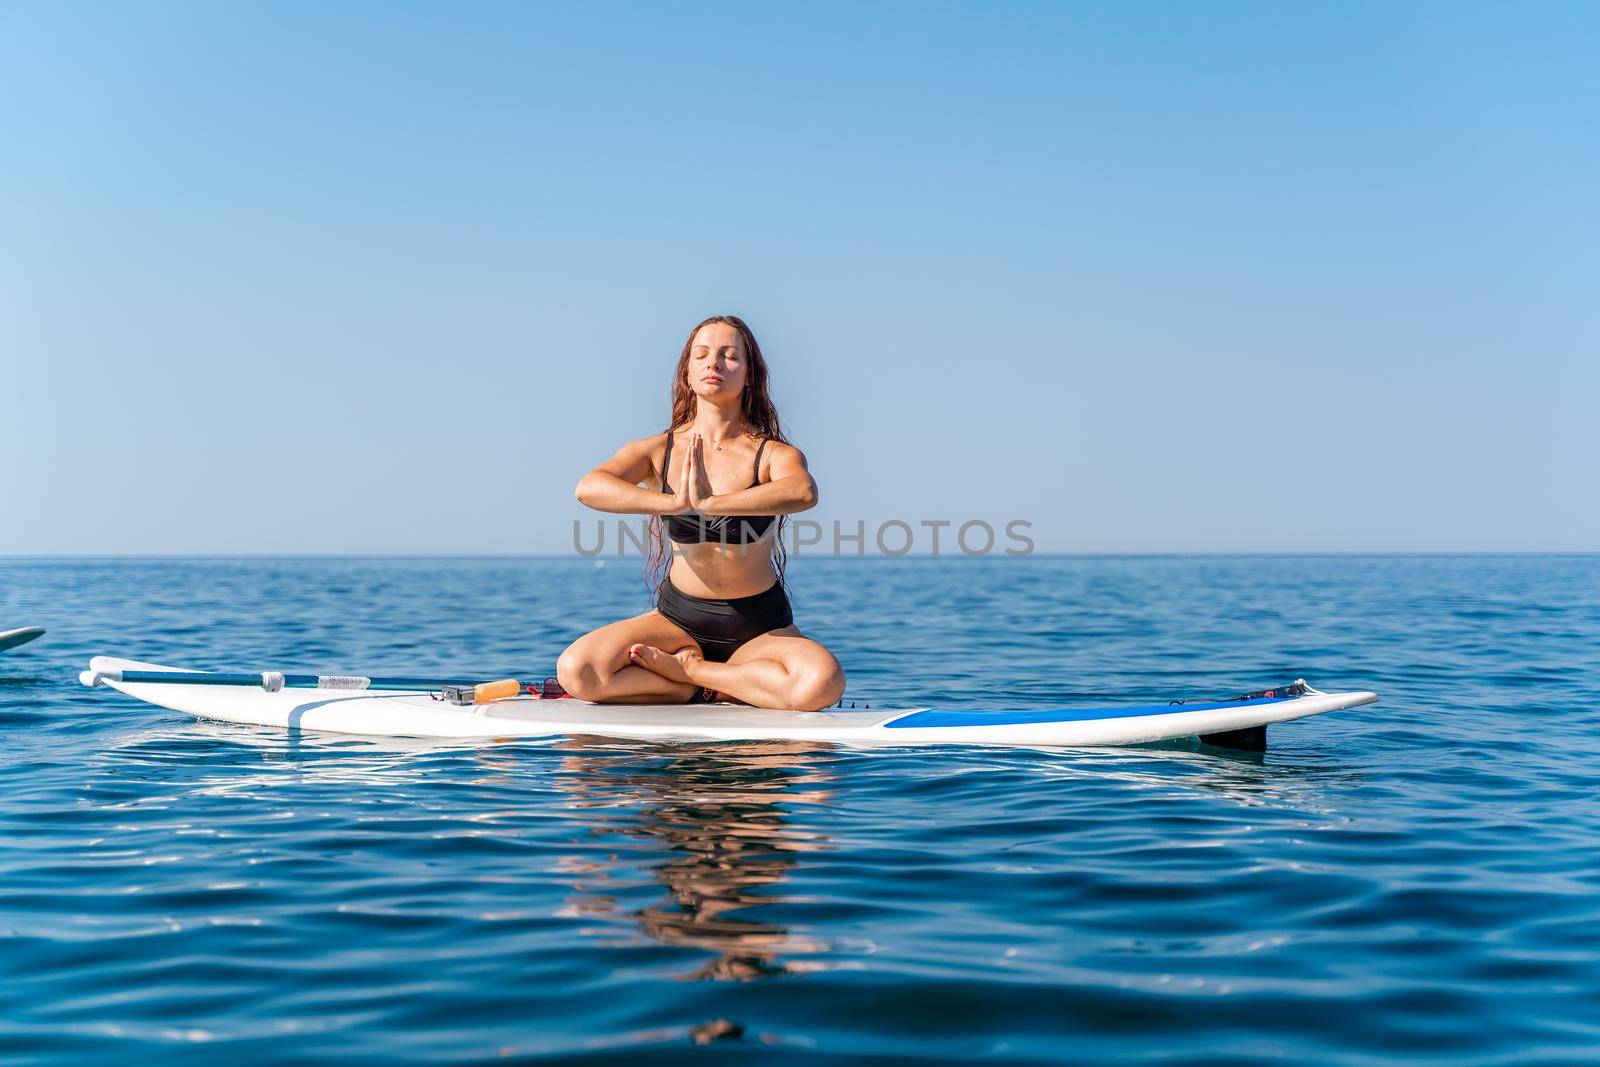 Sporty girl on a glanders surfboard in the sea on a sunny summer day. In a striped swimsuit, he sits in the lotus position with his eyes closed